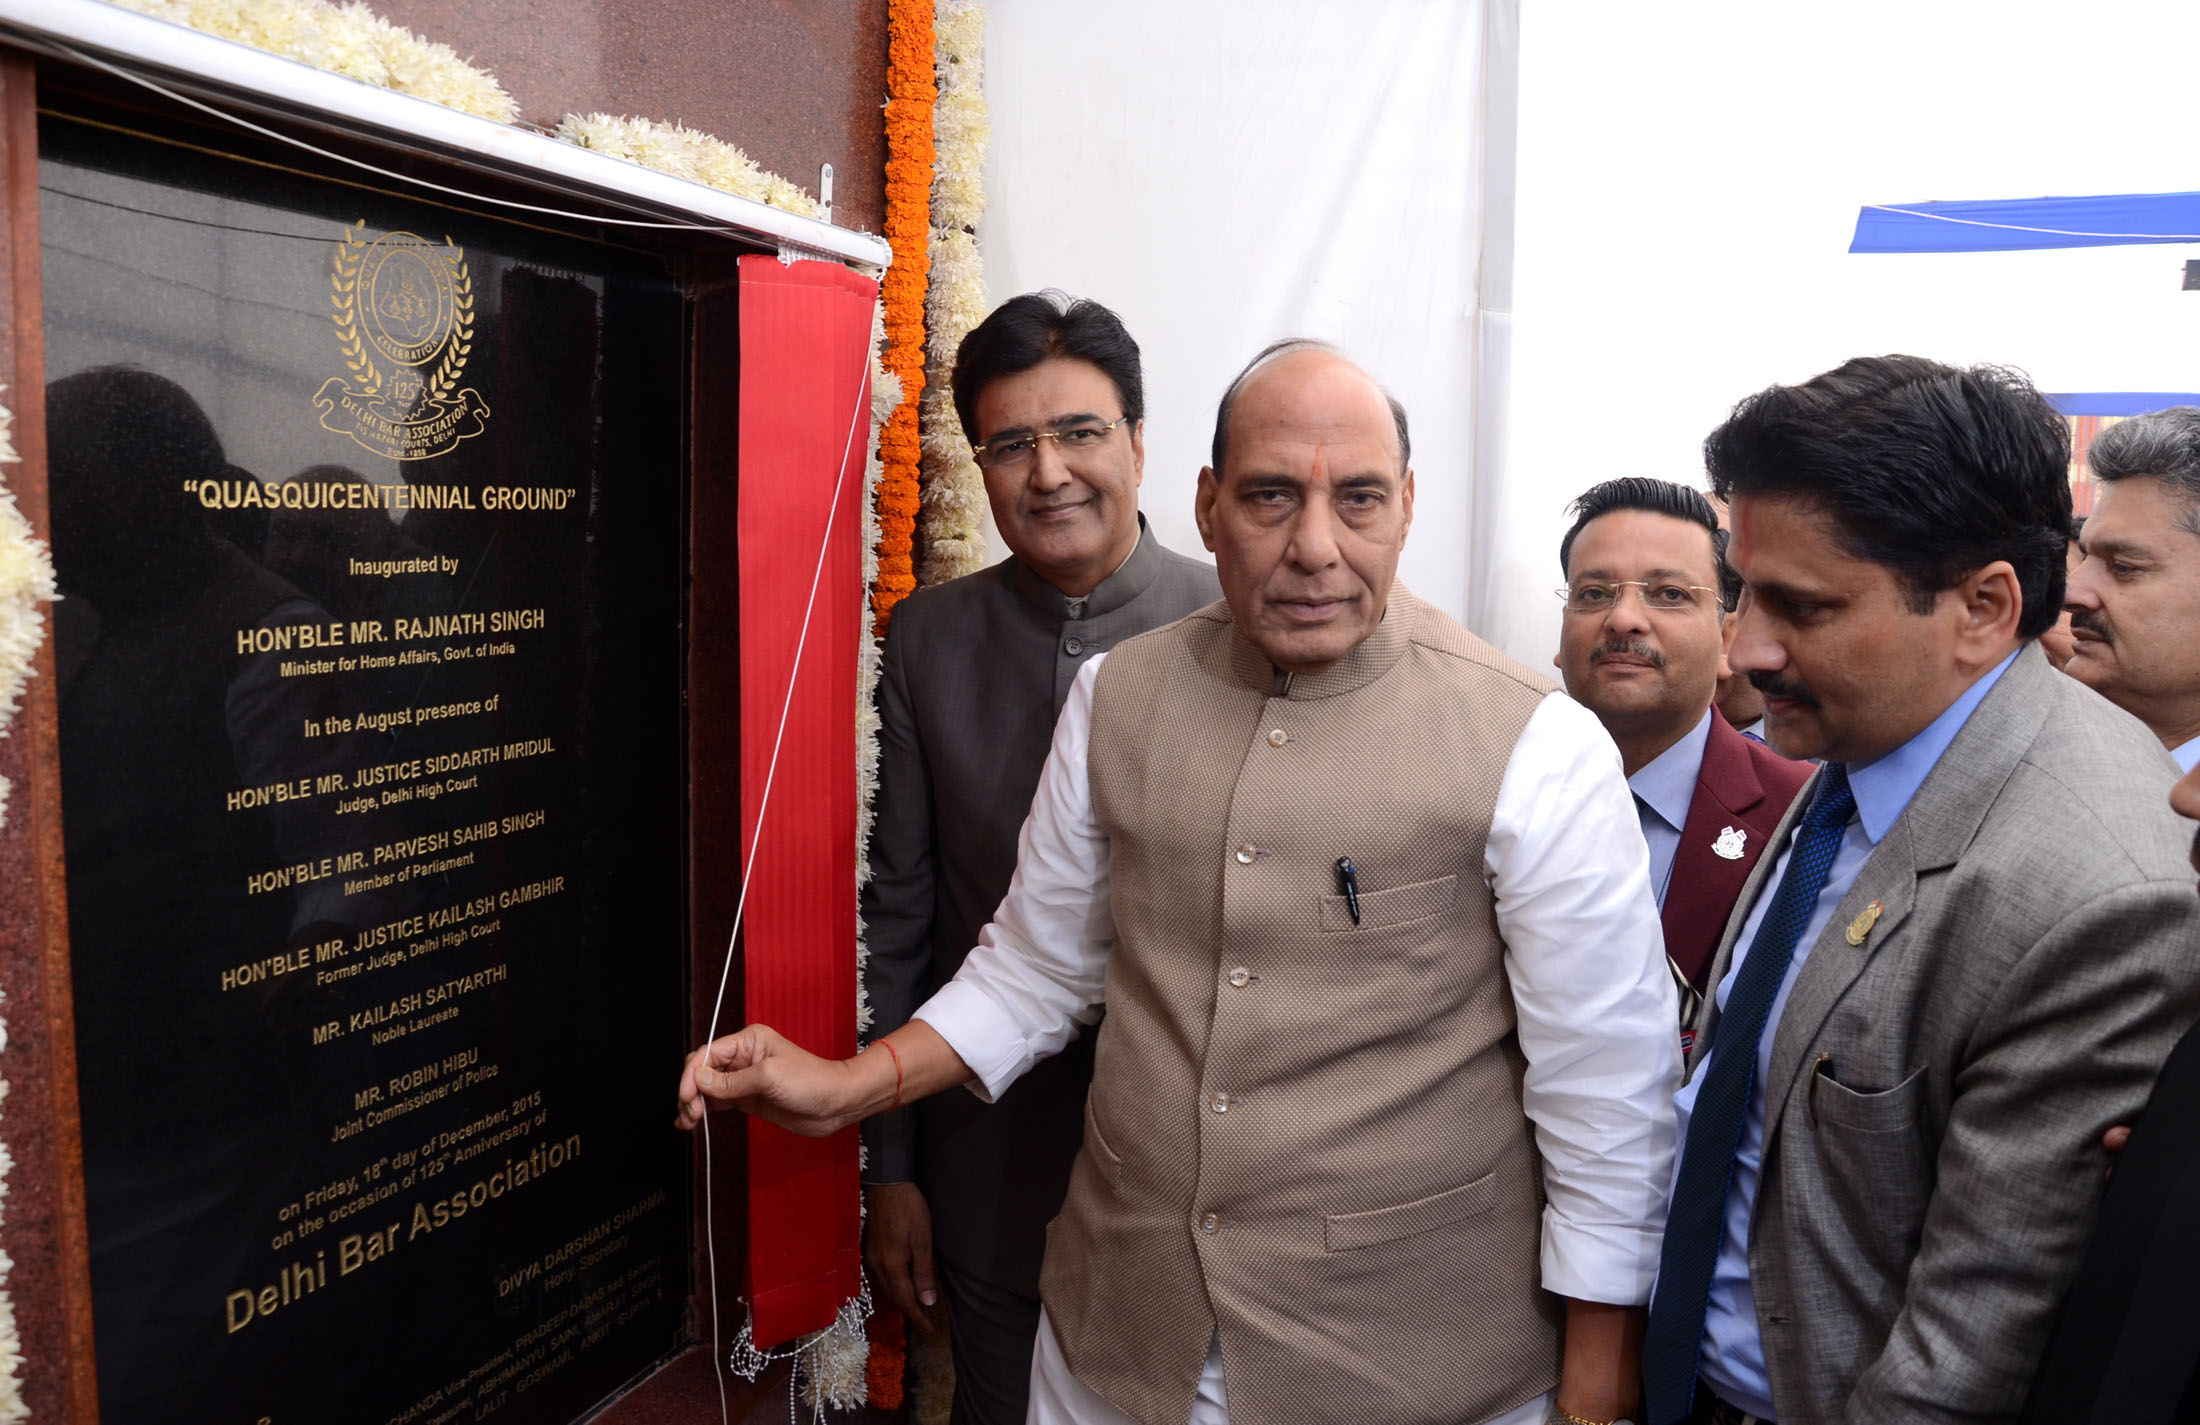 The Union Home Minister, Shri Rajnath Singh inaugurating the Quasquicentennial ground on the occasion of 125th Anniversary of Delhi Bar Association, , in New Delhi on December 18, 2015.